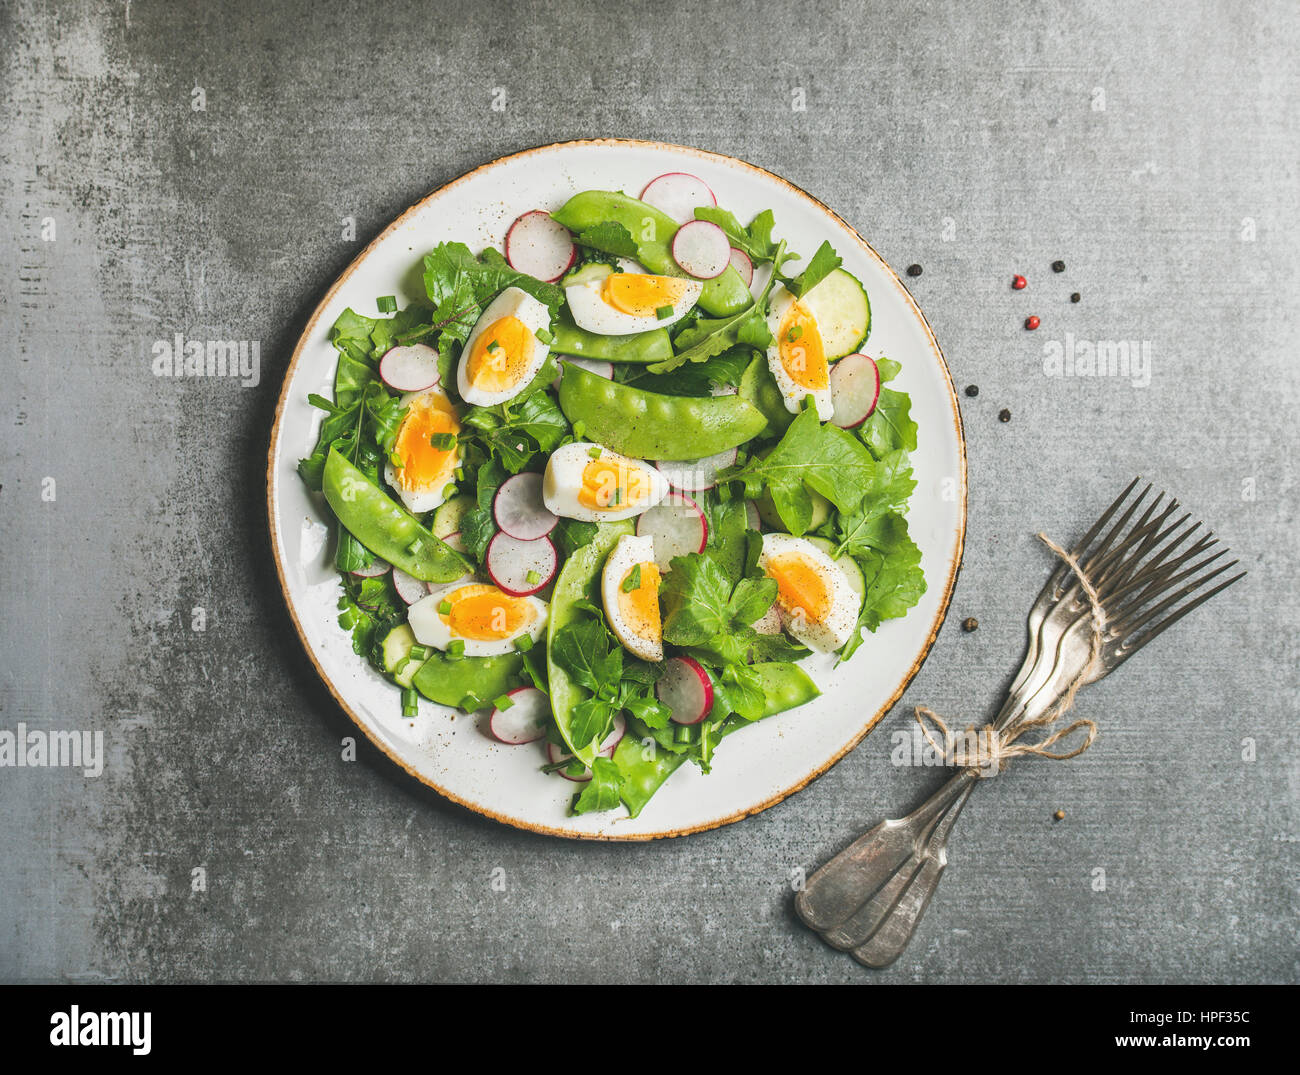 Healthy spring green salad with radish, boiled egg, arugula, green pea and mint in white plate over grey concrete background, top view Stock Photo